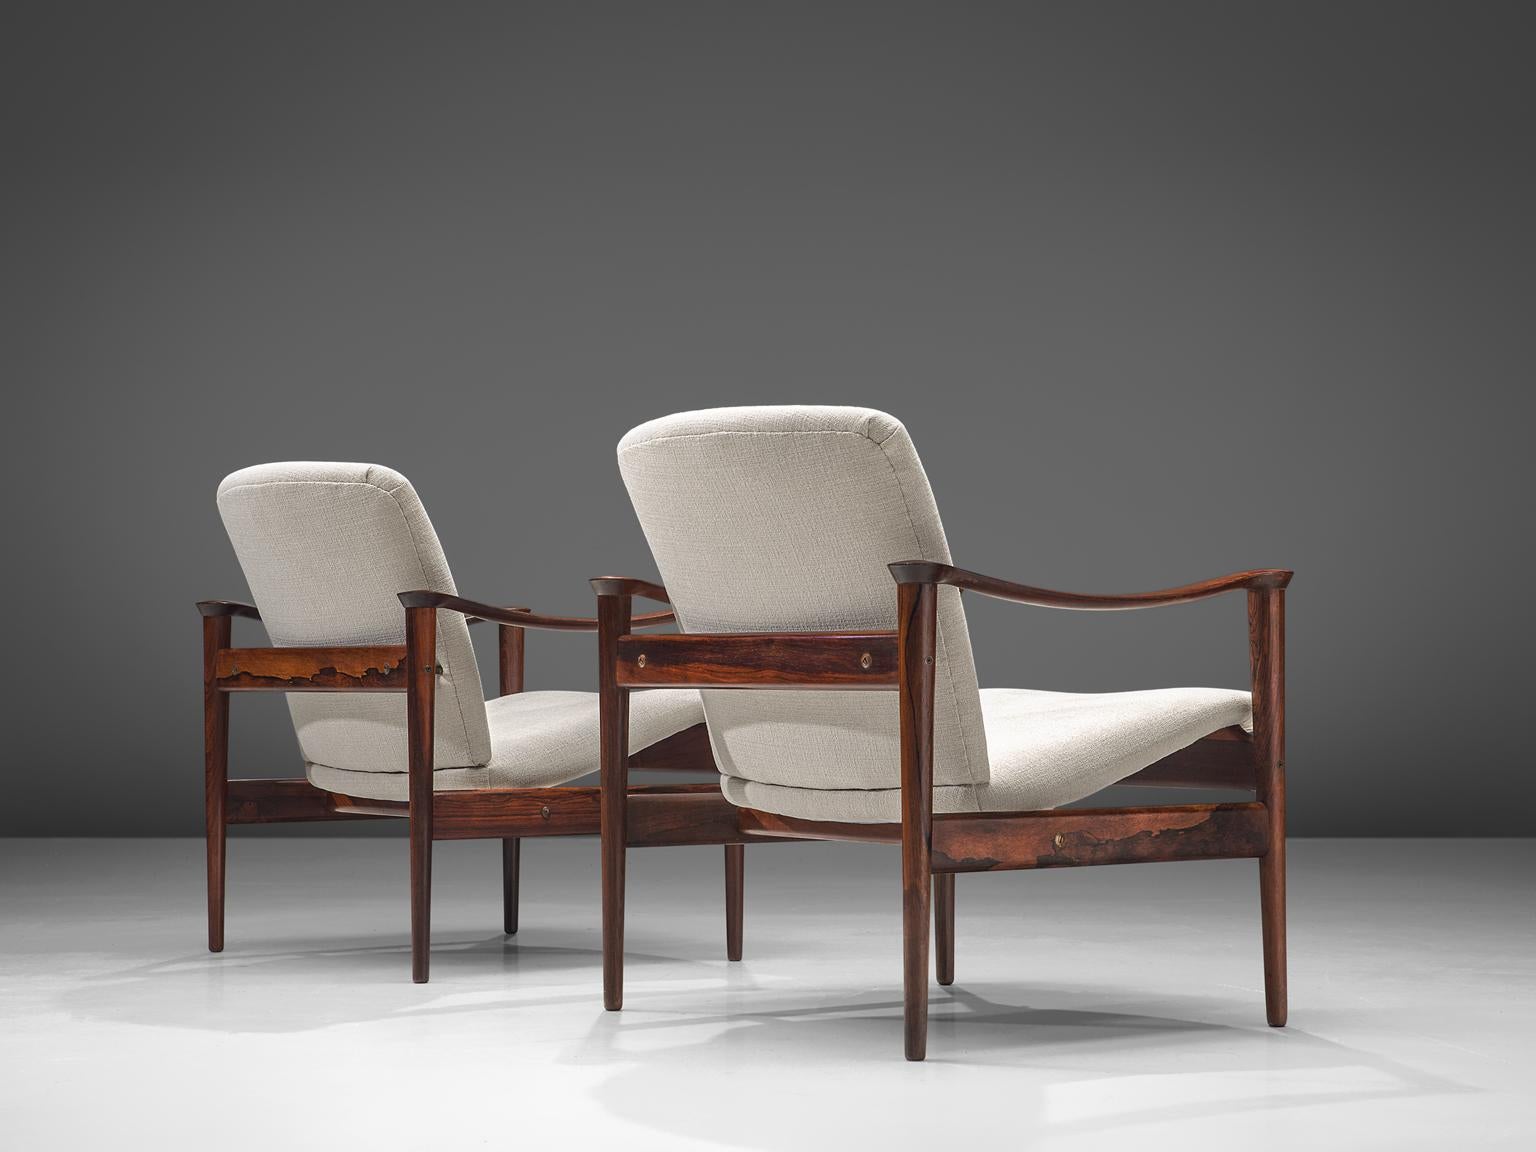 Fredrik A. Kayser Rosewood and Armchairs with White Fabric (Skandinavische Moderne)